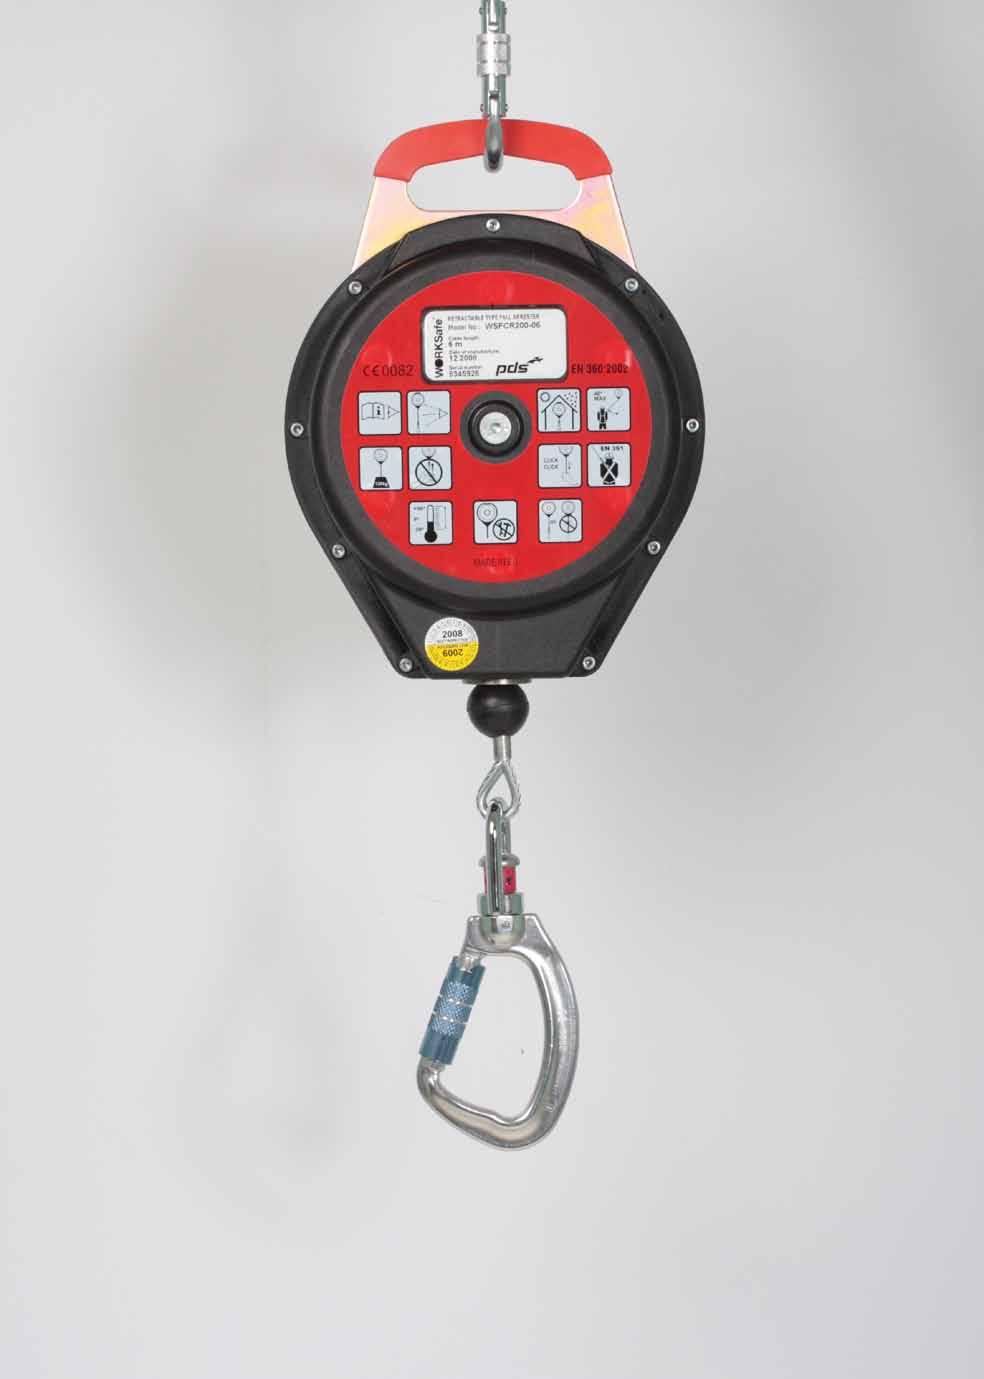 WORKSafe SRL is a component of a personal fall arrest system and must be used in conjunction with a WORKSafe full body harness, anchorage connector and a qualified anchorage point.